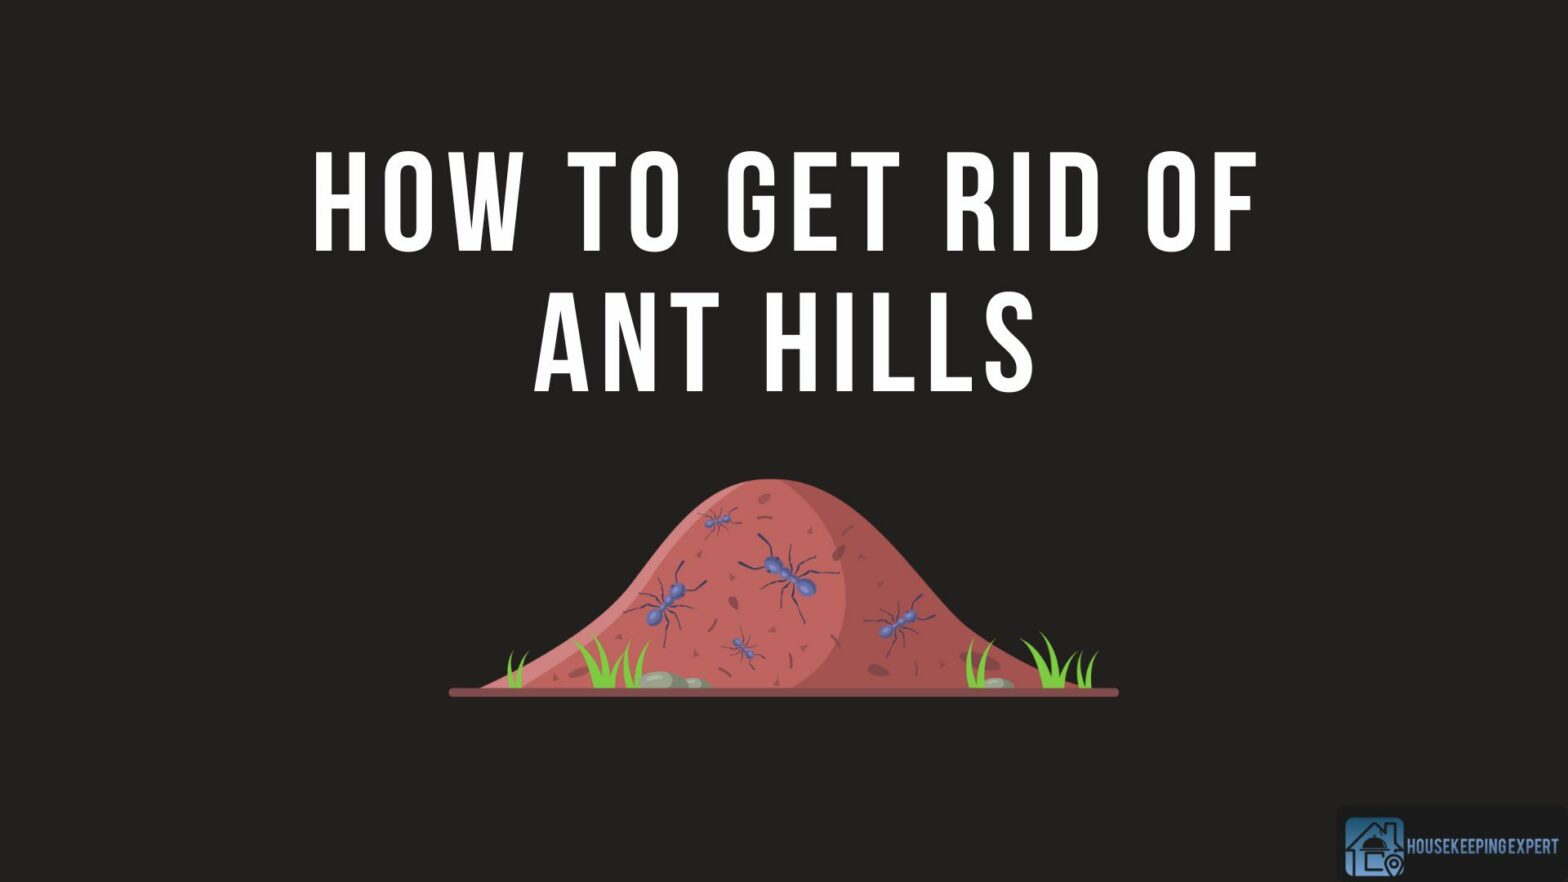 How To Get Rid Of Ant Hills